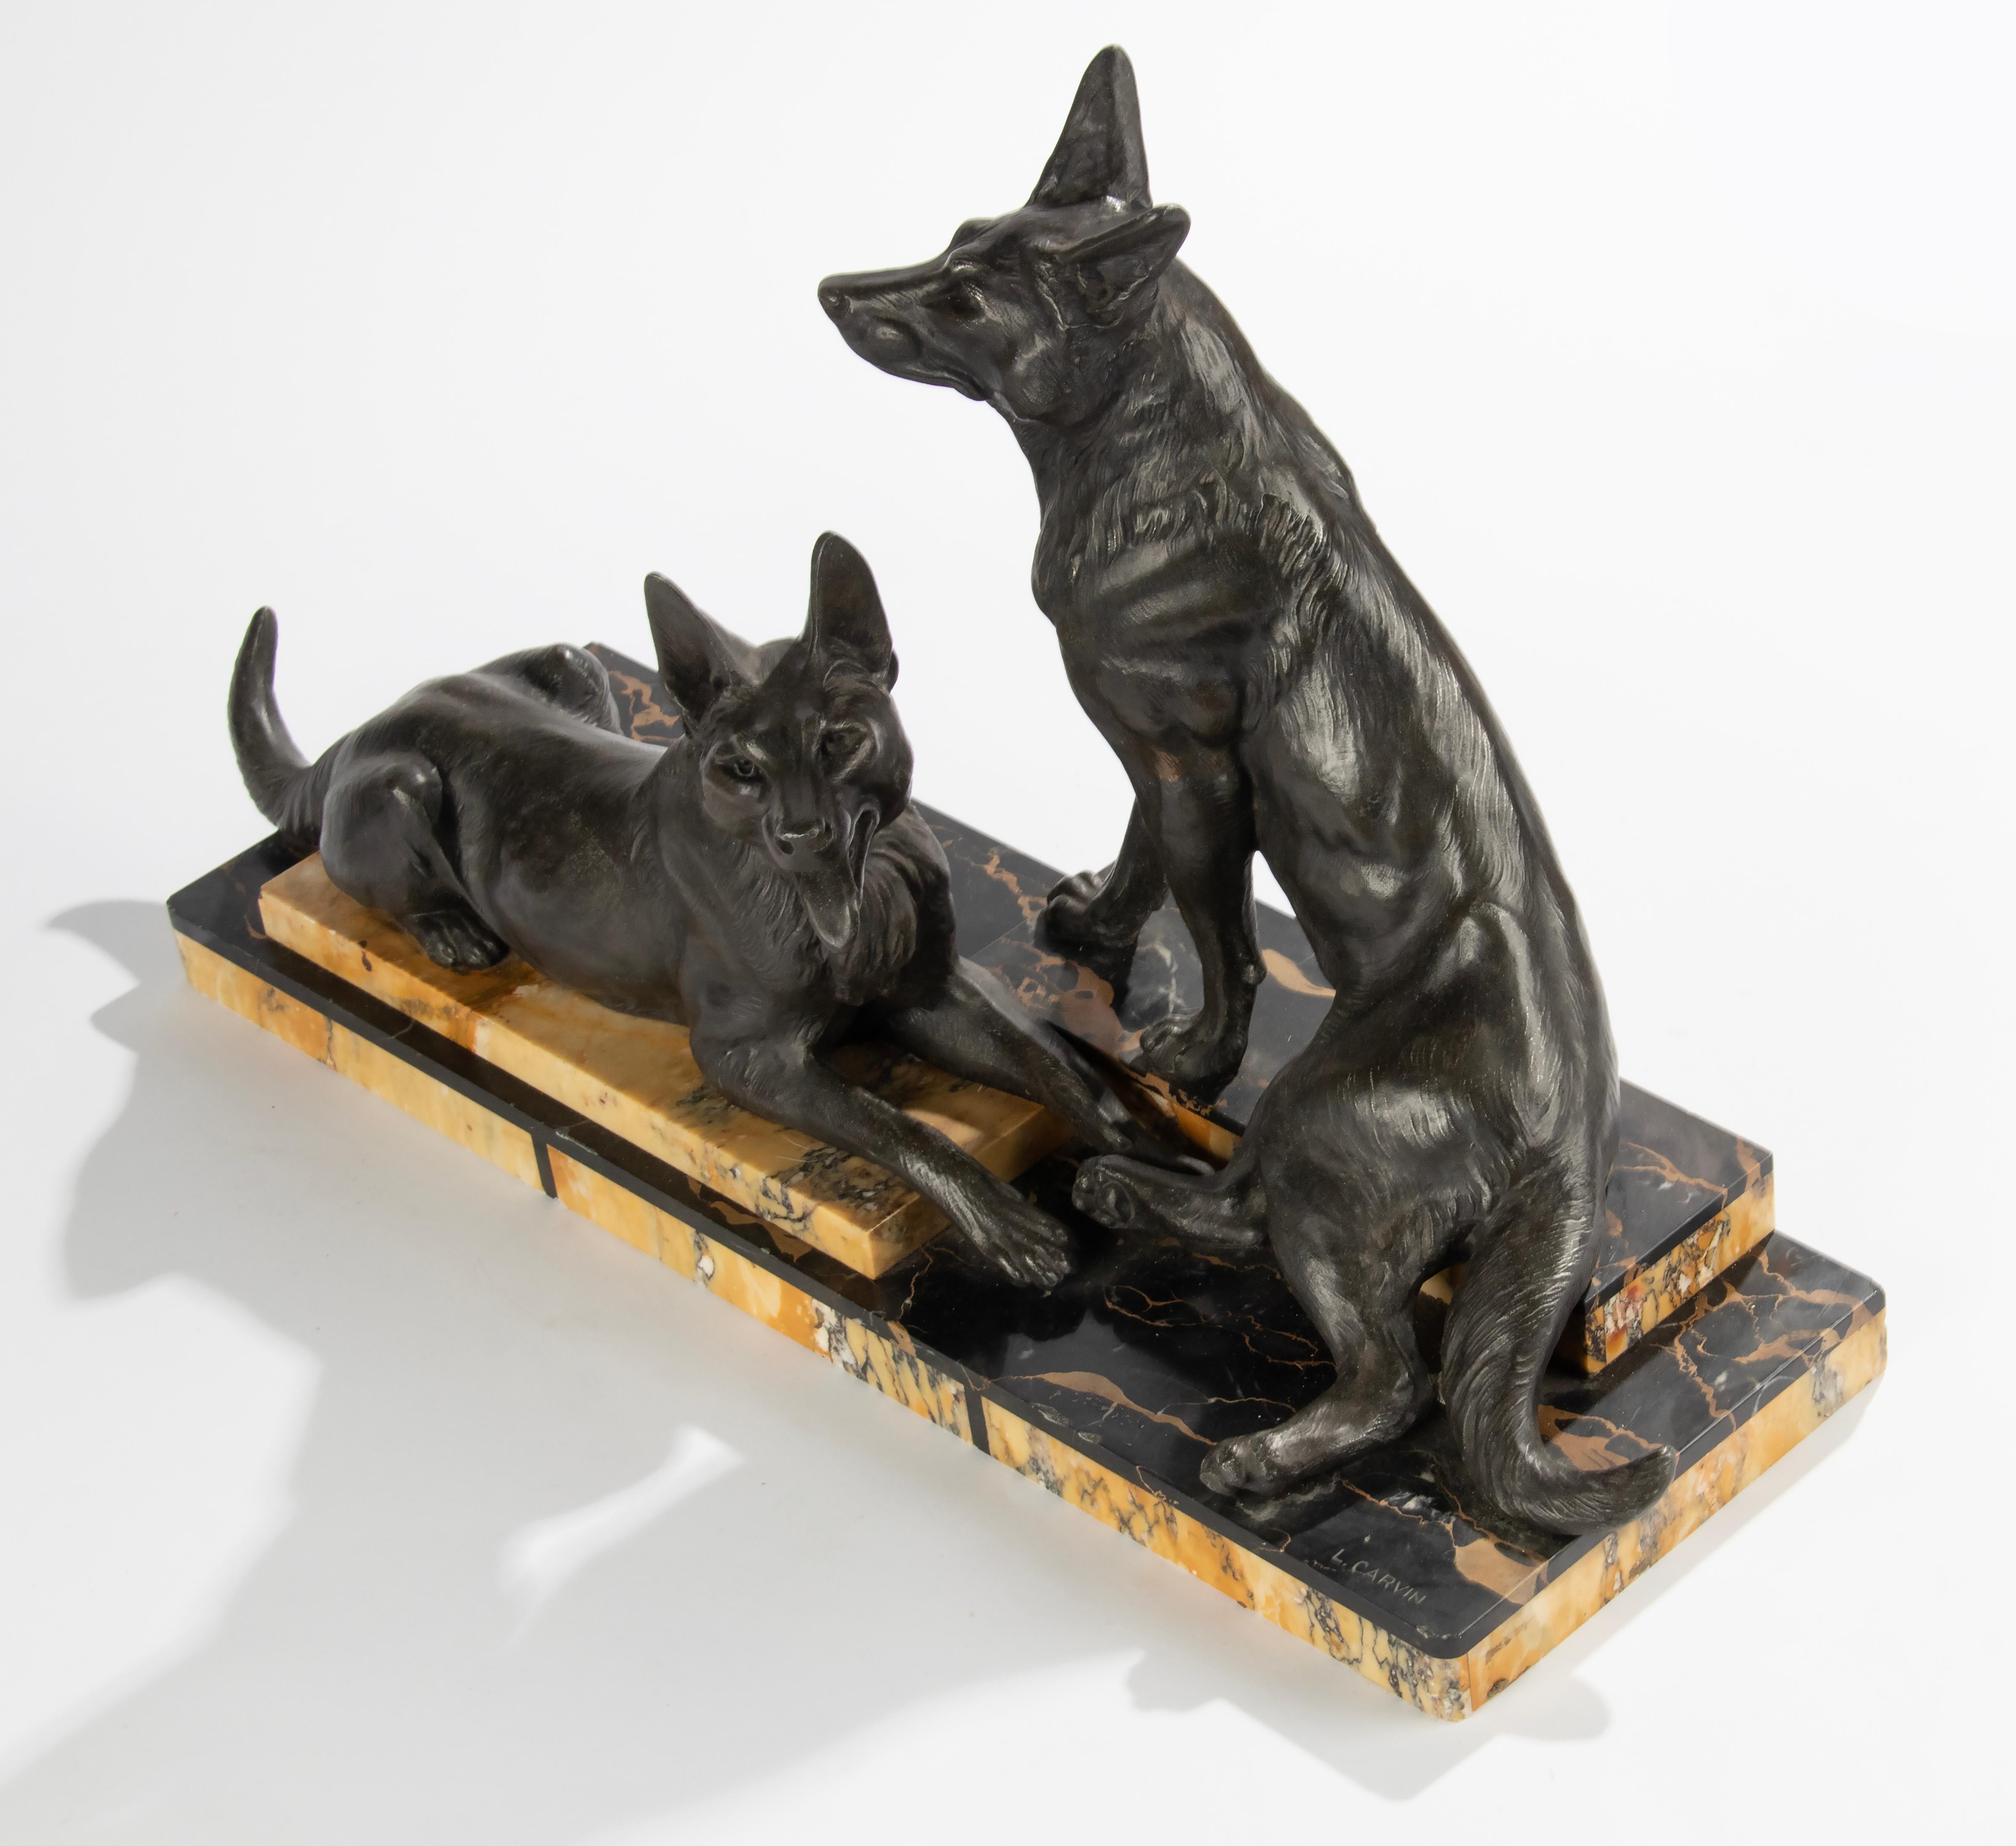 Art Deco Period Sculpture of German or Belgian Sheppards by Louis Carvin For Sale 3